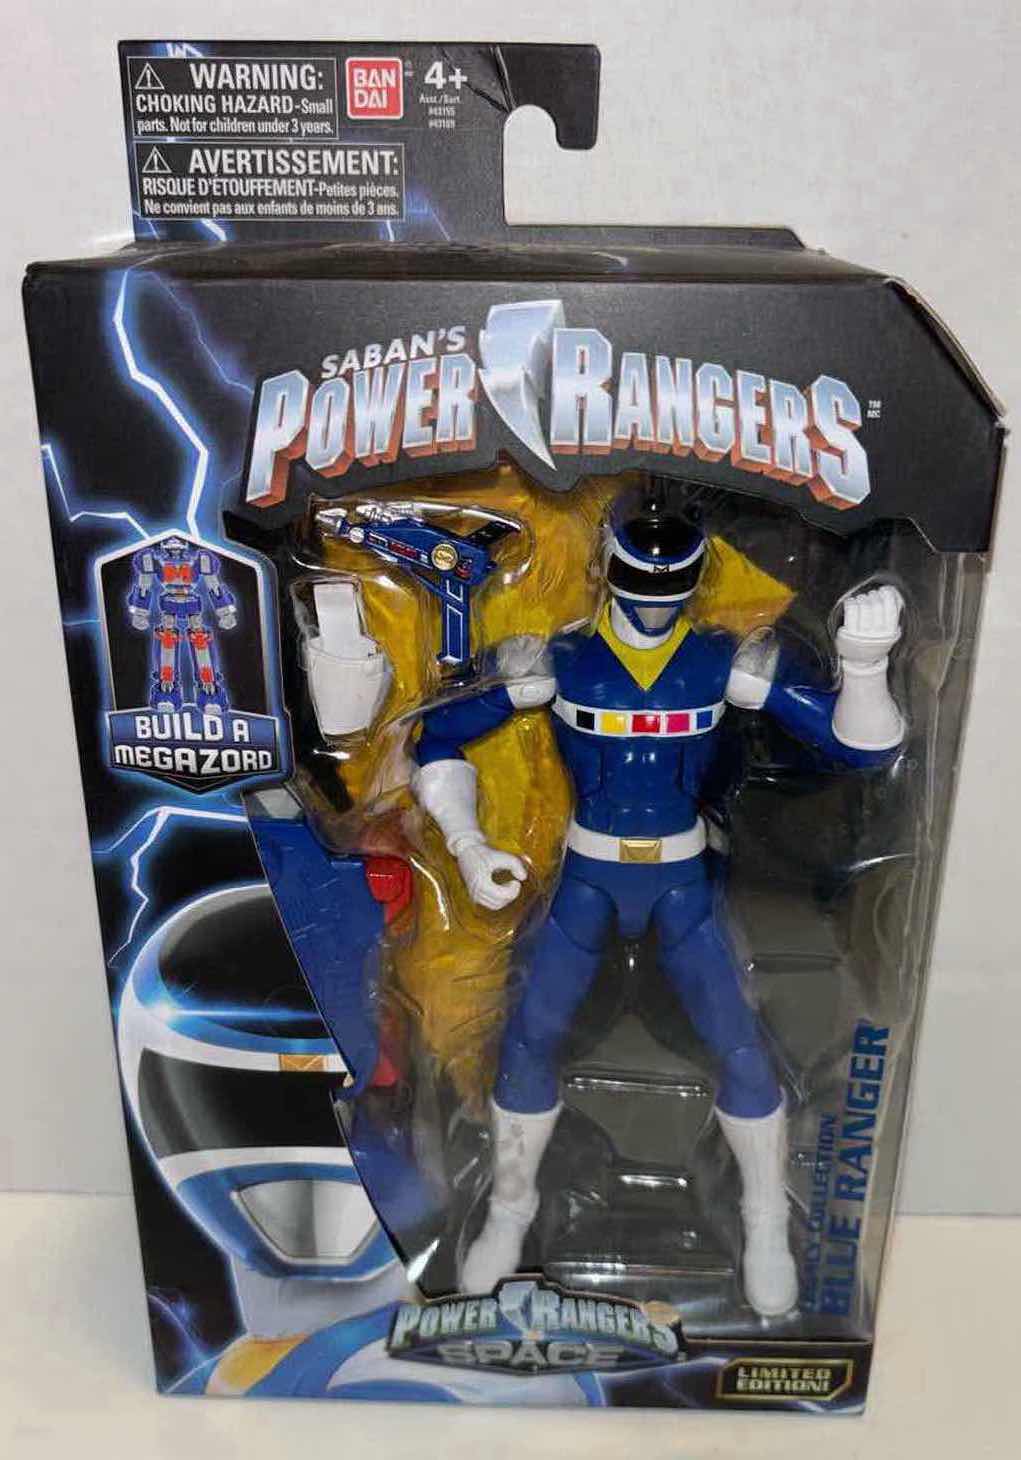 Photo 5 of NEW BANDAI SABAN’S POWER RANGERS ACTION FIGURES & ACCESSORIES 5-PACK, POWER RANGERS IN SPACE LIMITED EDITION LEGACY COLLECTION “RED RANGER, BLACK RANGER, YELLOW RANGER, BLUE RANGER & PINK RANGER”